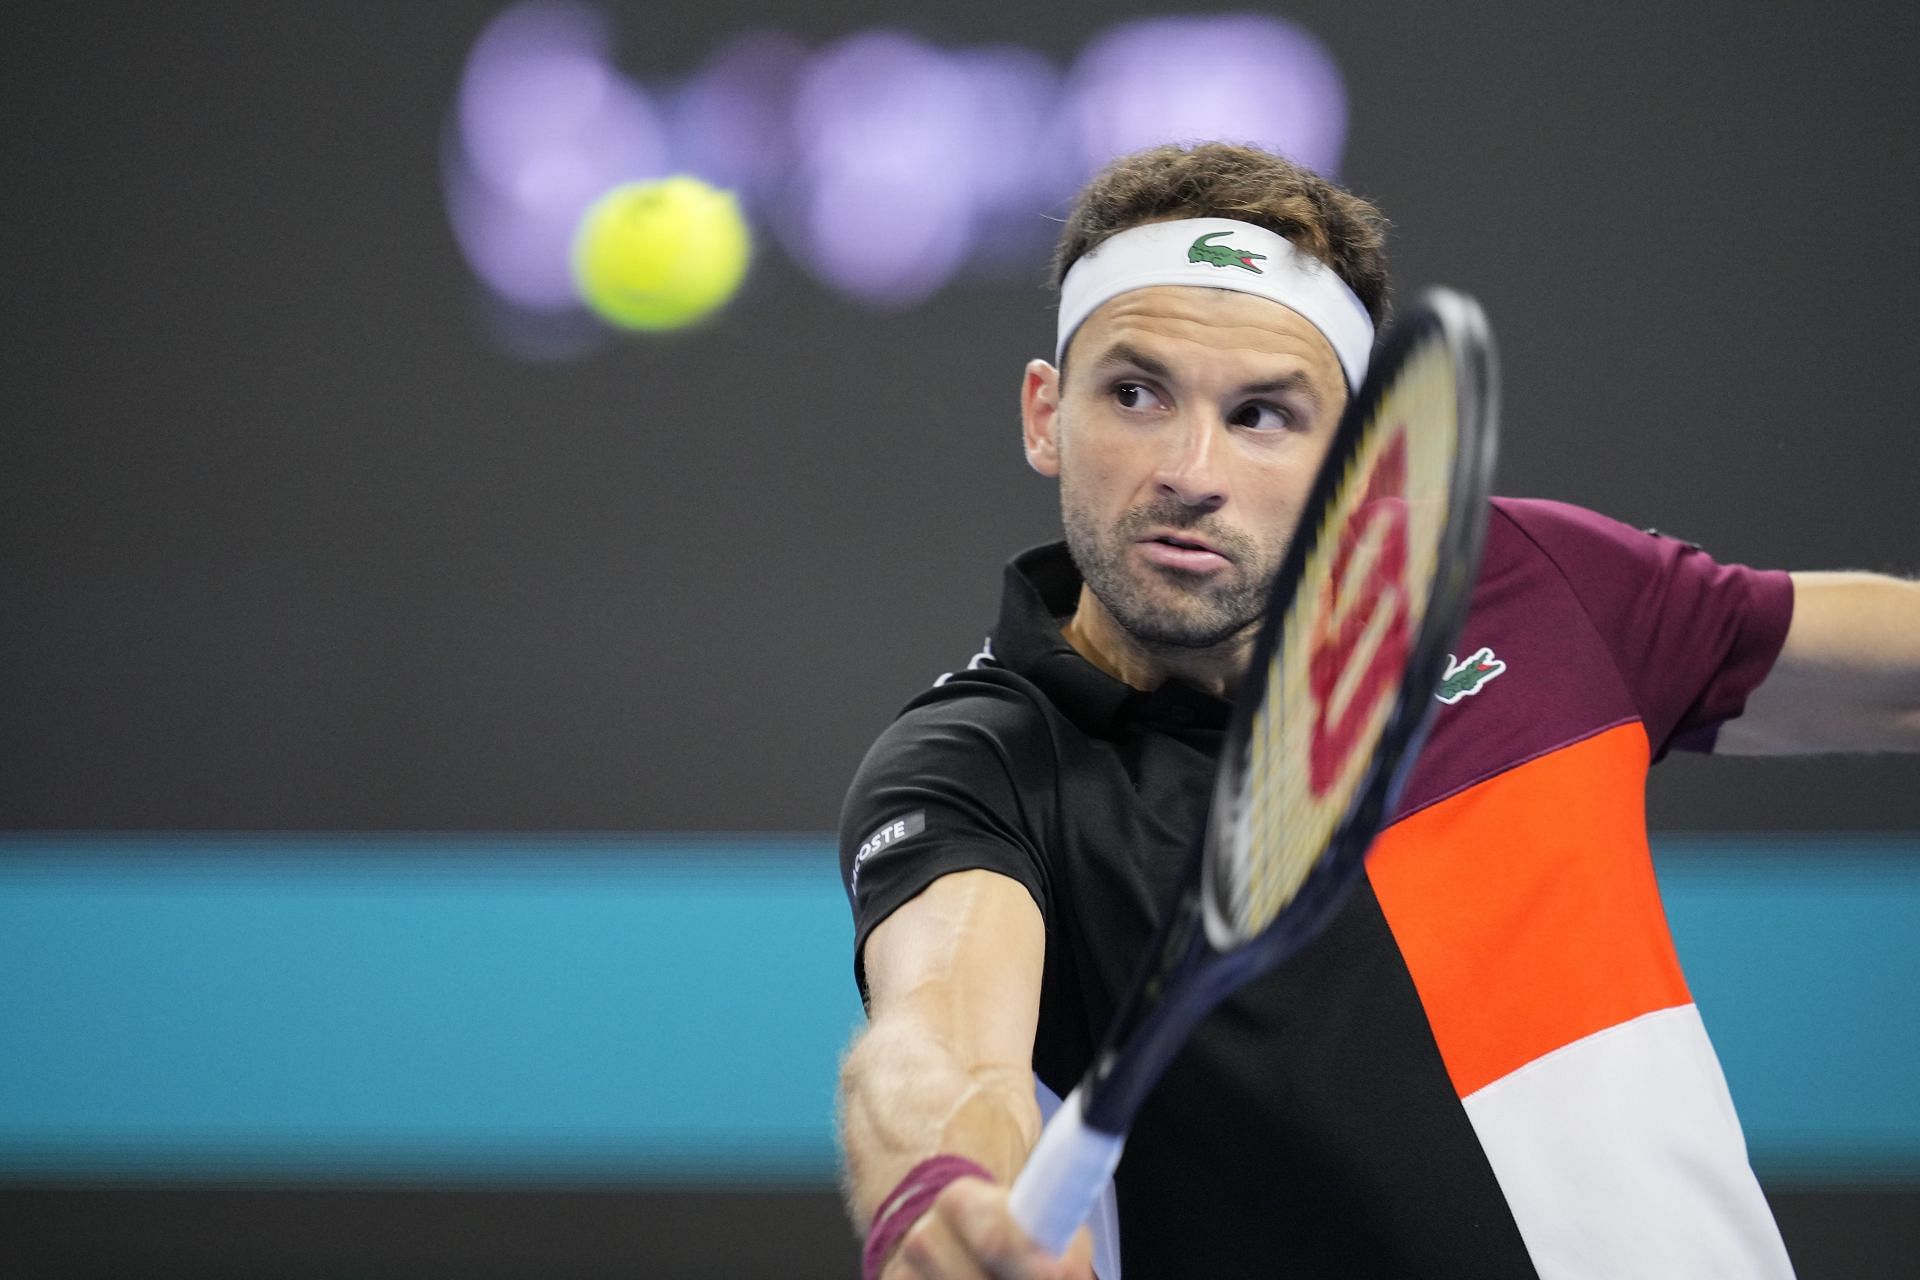 Grigor Dimitrov will look to match his best result in Shanghai.